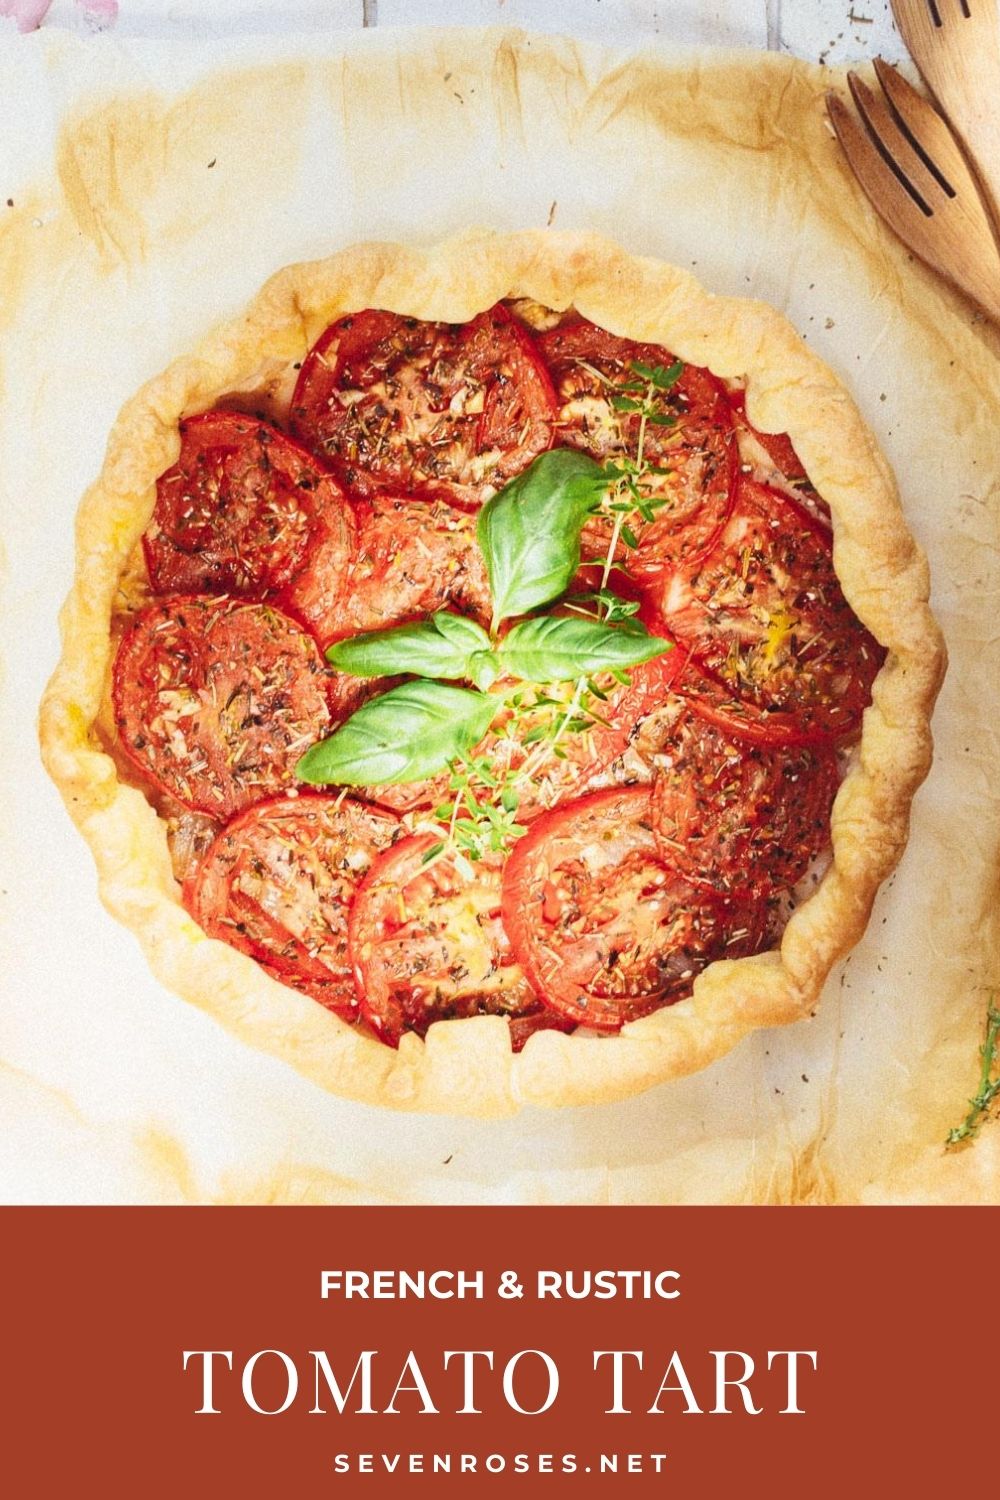 French rustic tomato tart with puff pastry: Summer in a bite!